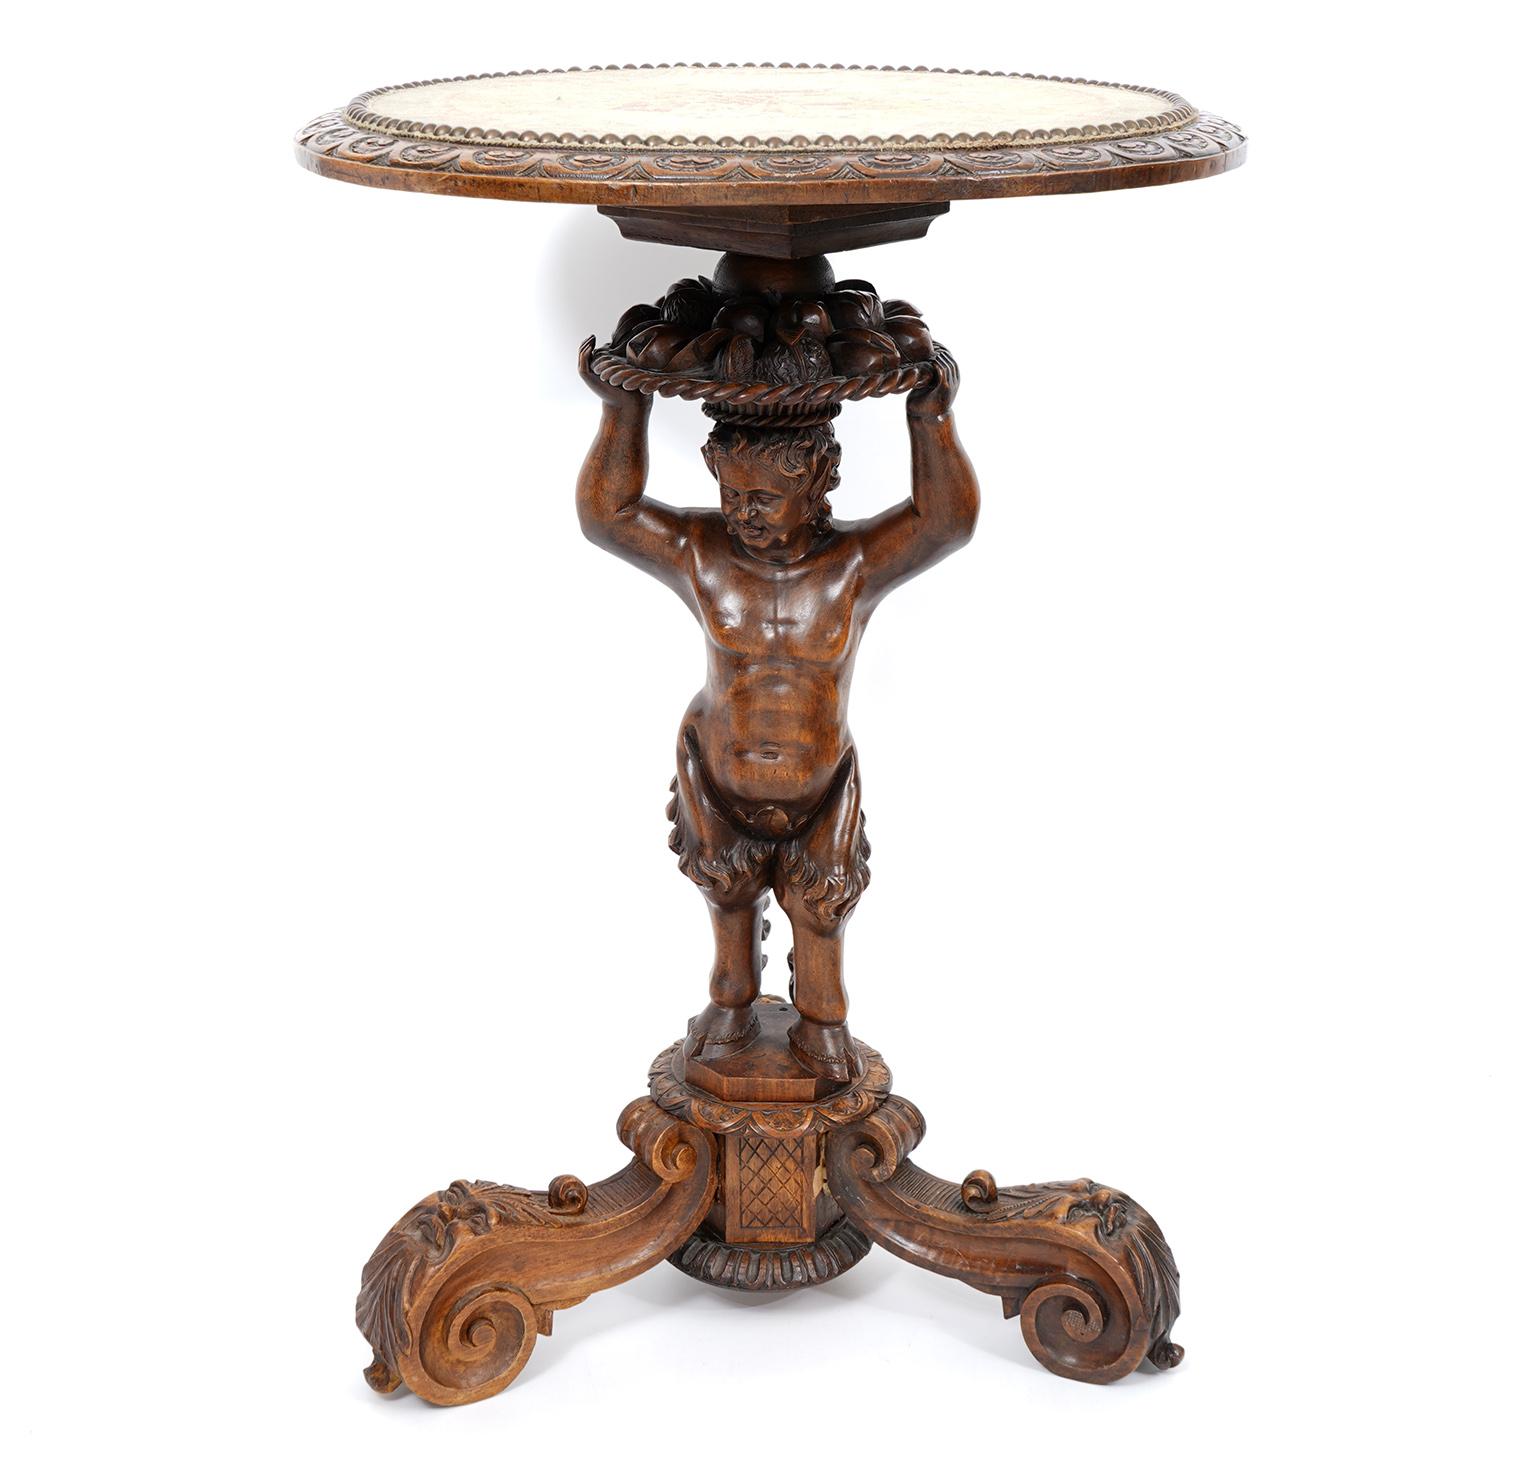 This unique Italian figural table dating to around 1870 features a round nail head trimmed needlepoint top with carved walnut banding. The top is supported by a carved statue of a young satyr with both human and animal attributes as known in Greek